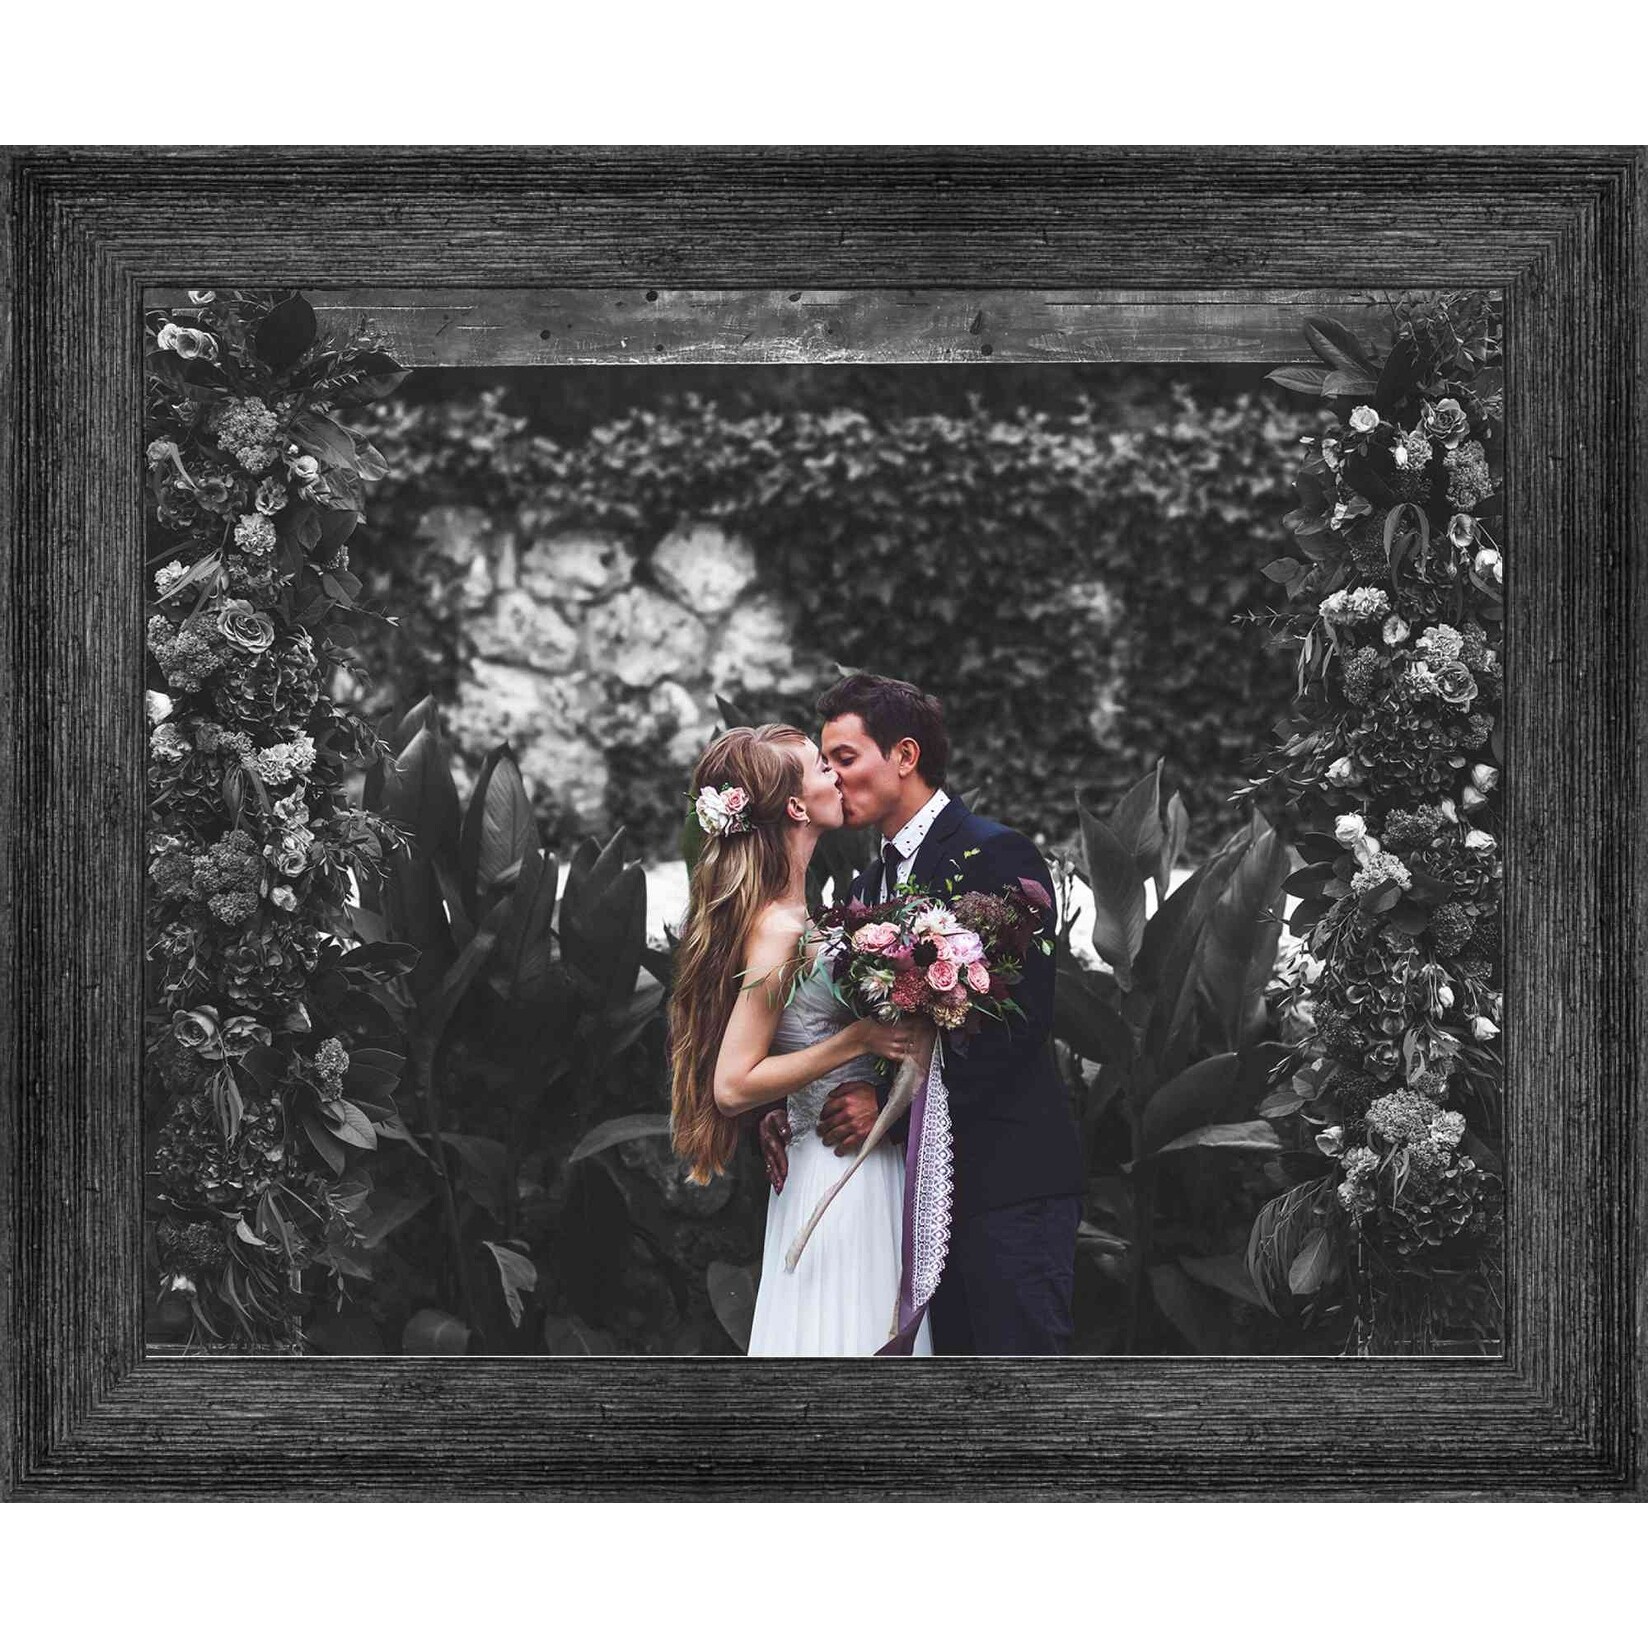 6x49 Black Barnwood Picture Frame - With Acrylic Front and Foam Board Backing - Black Barnwood (solid wood)